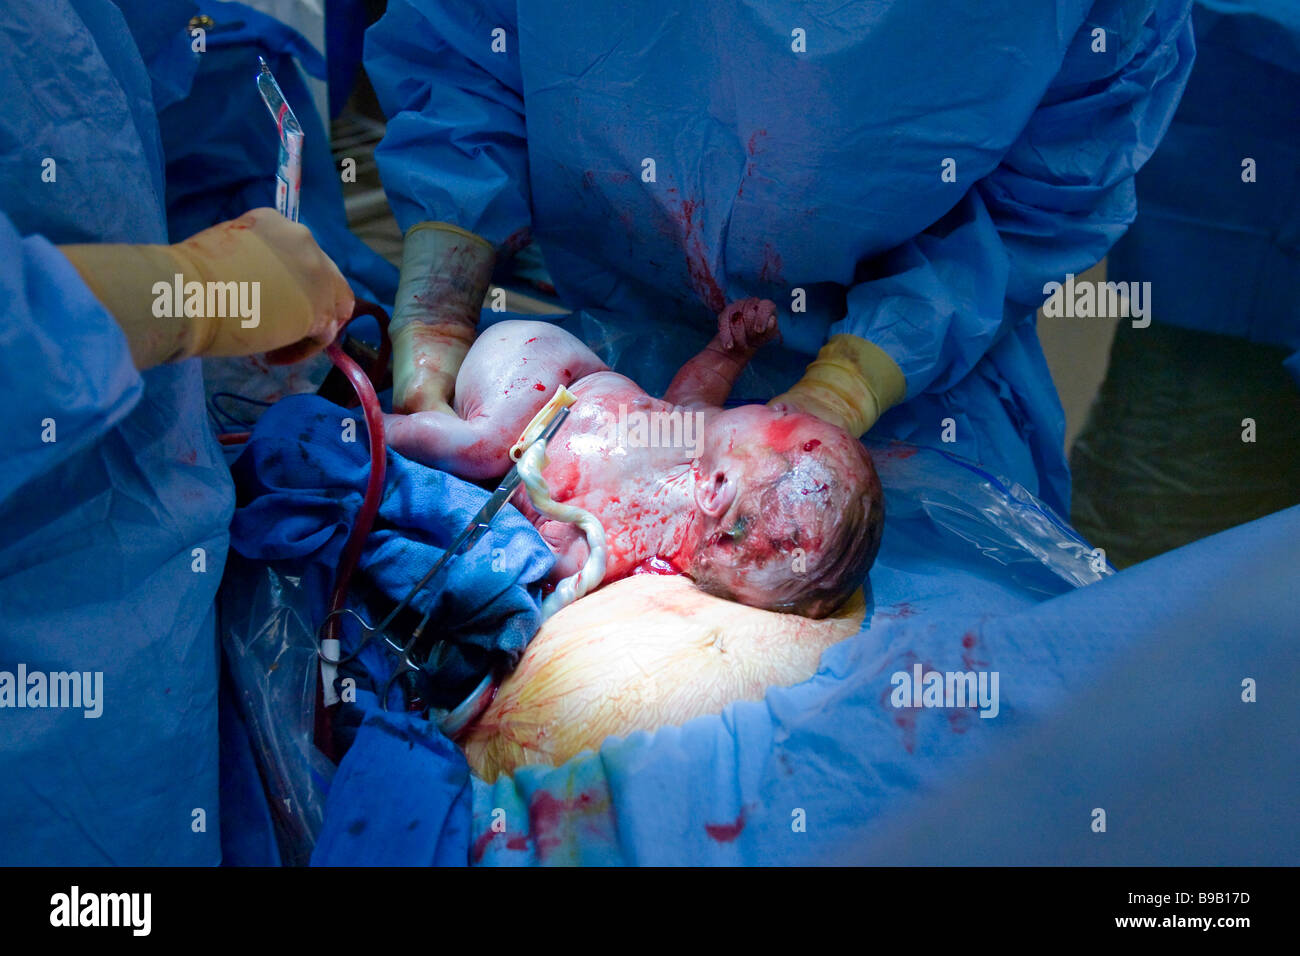 https://c8.alamy.com/comp/B9B17D/baby-being-delivered-by-caesarean-section-B9B17D.jpg